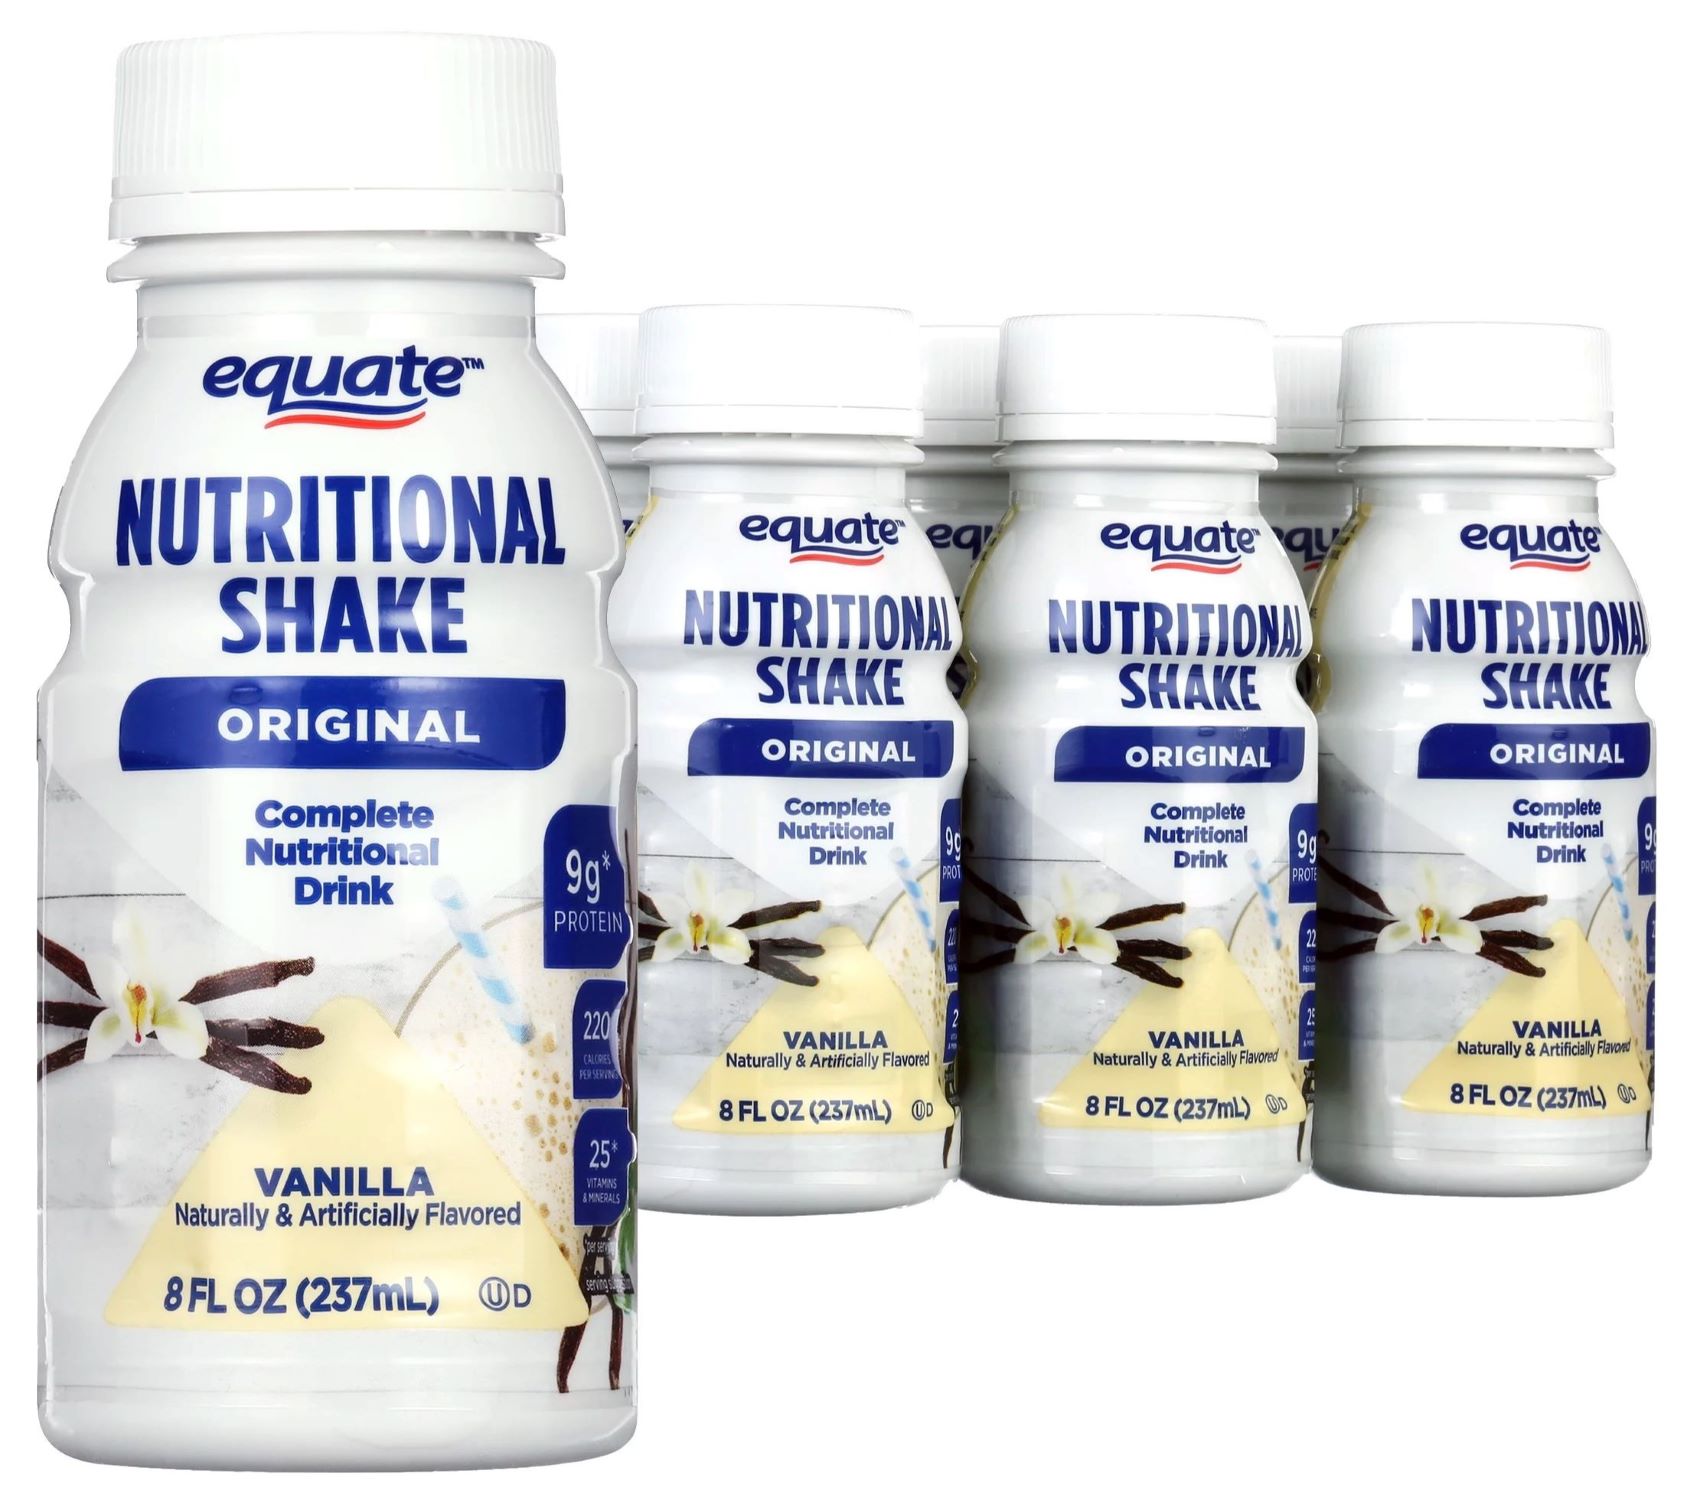 10 Nutrisystem Protein Shakes Nutrition Facts 